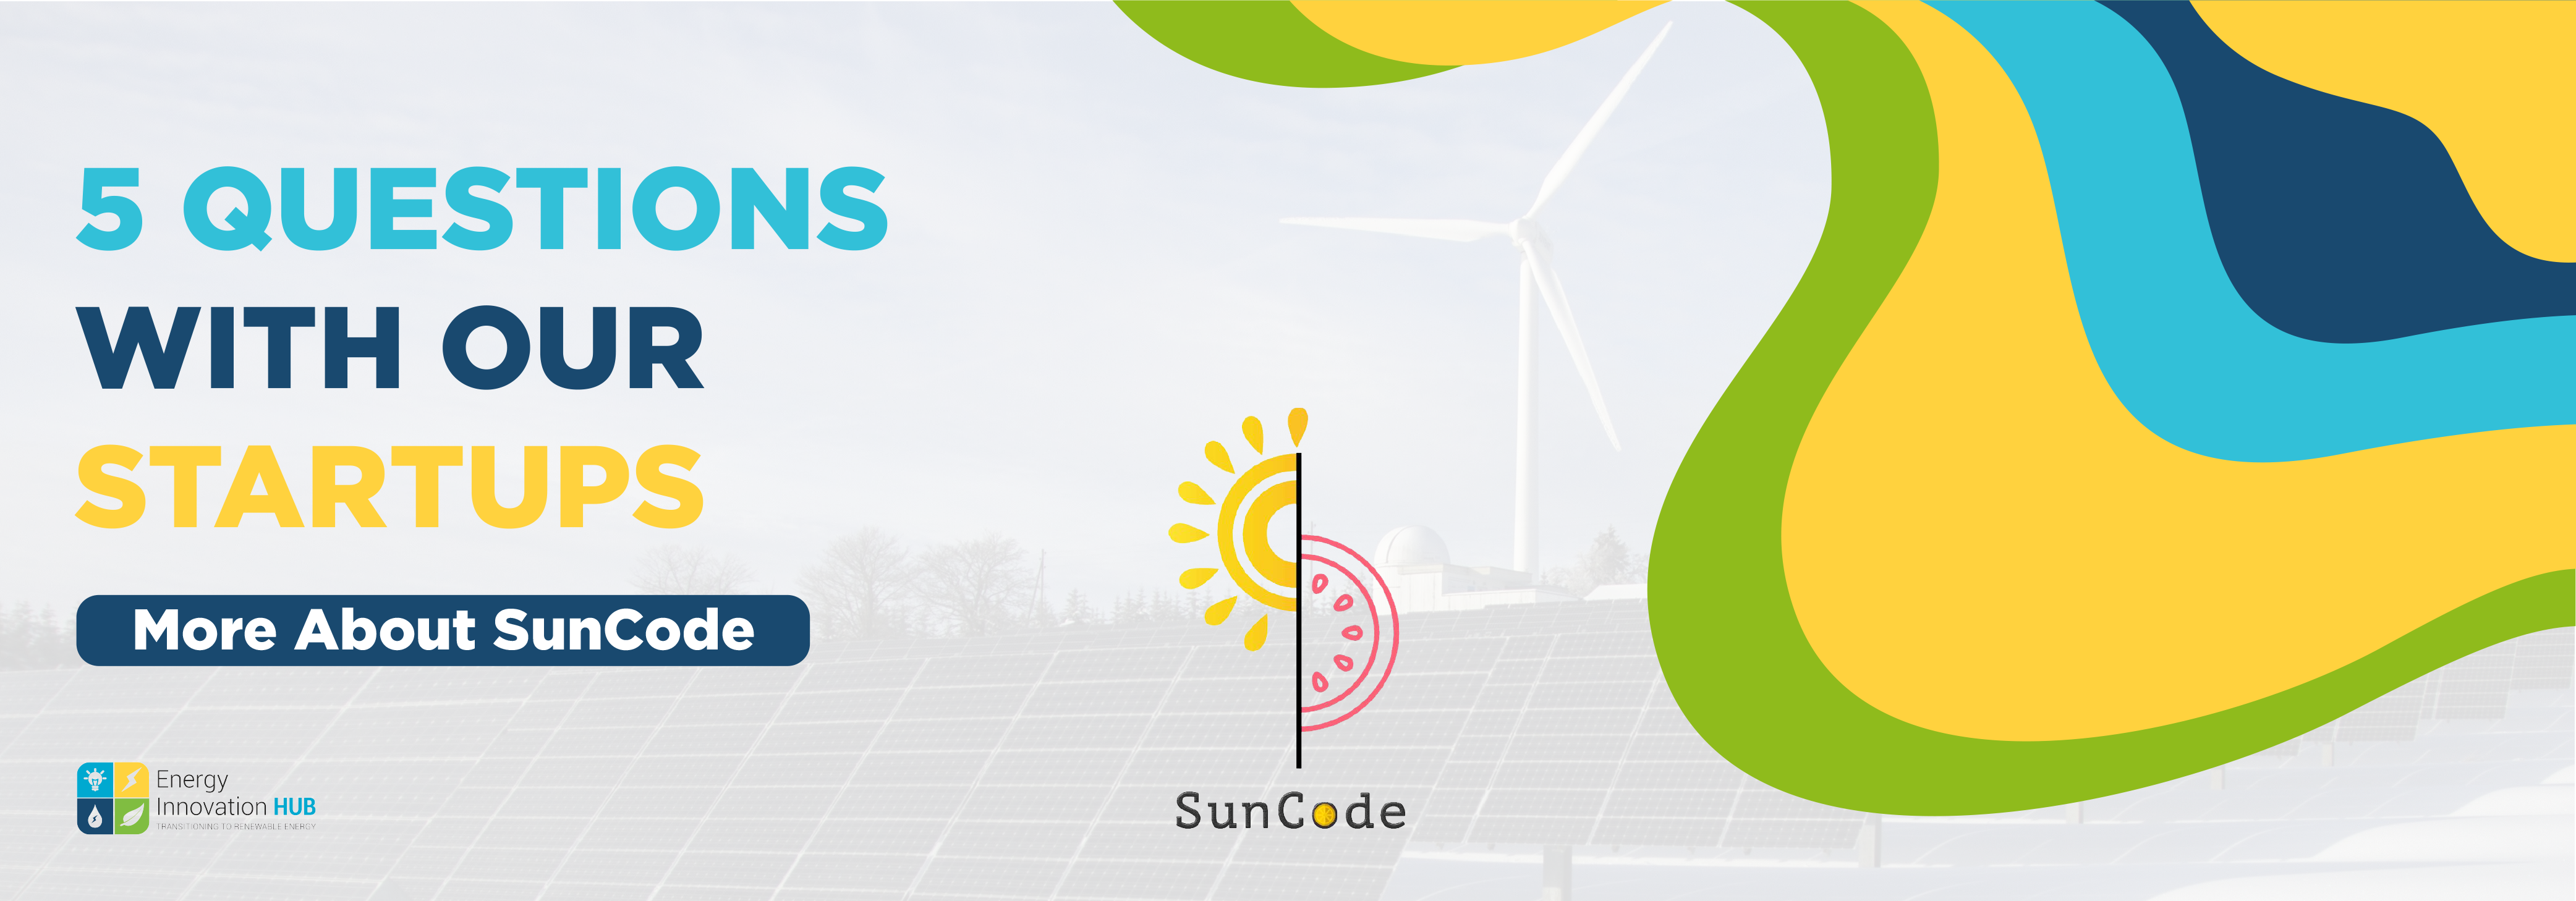 More About Suncode: 5 Questions with our startups